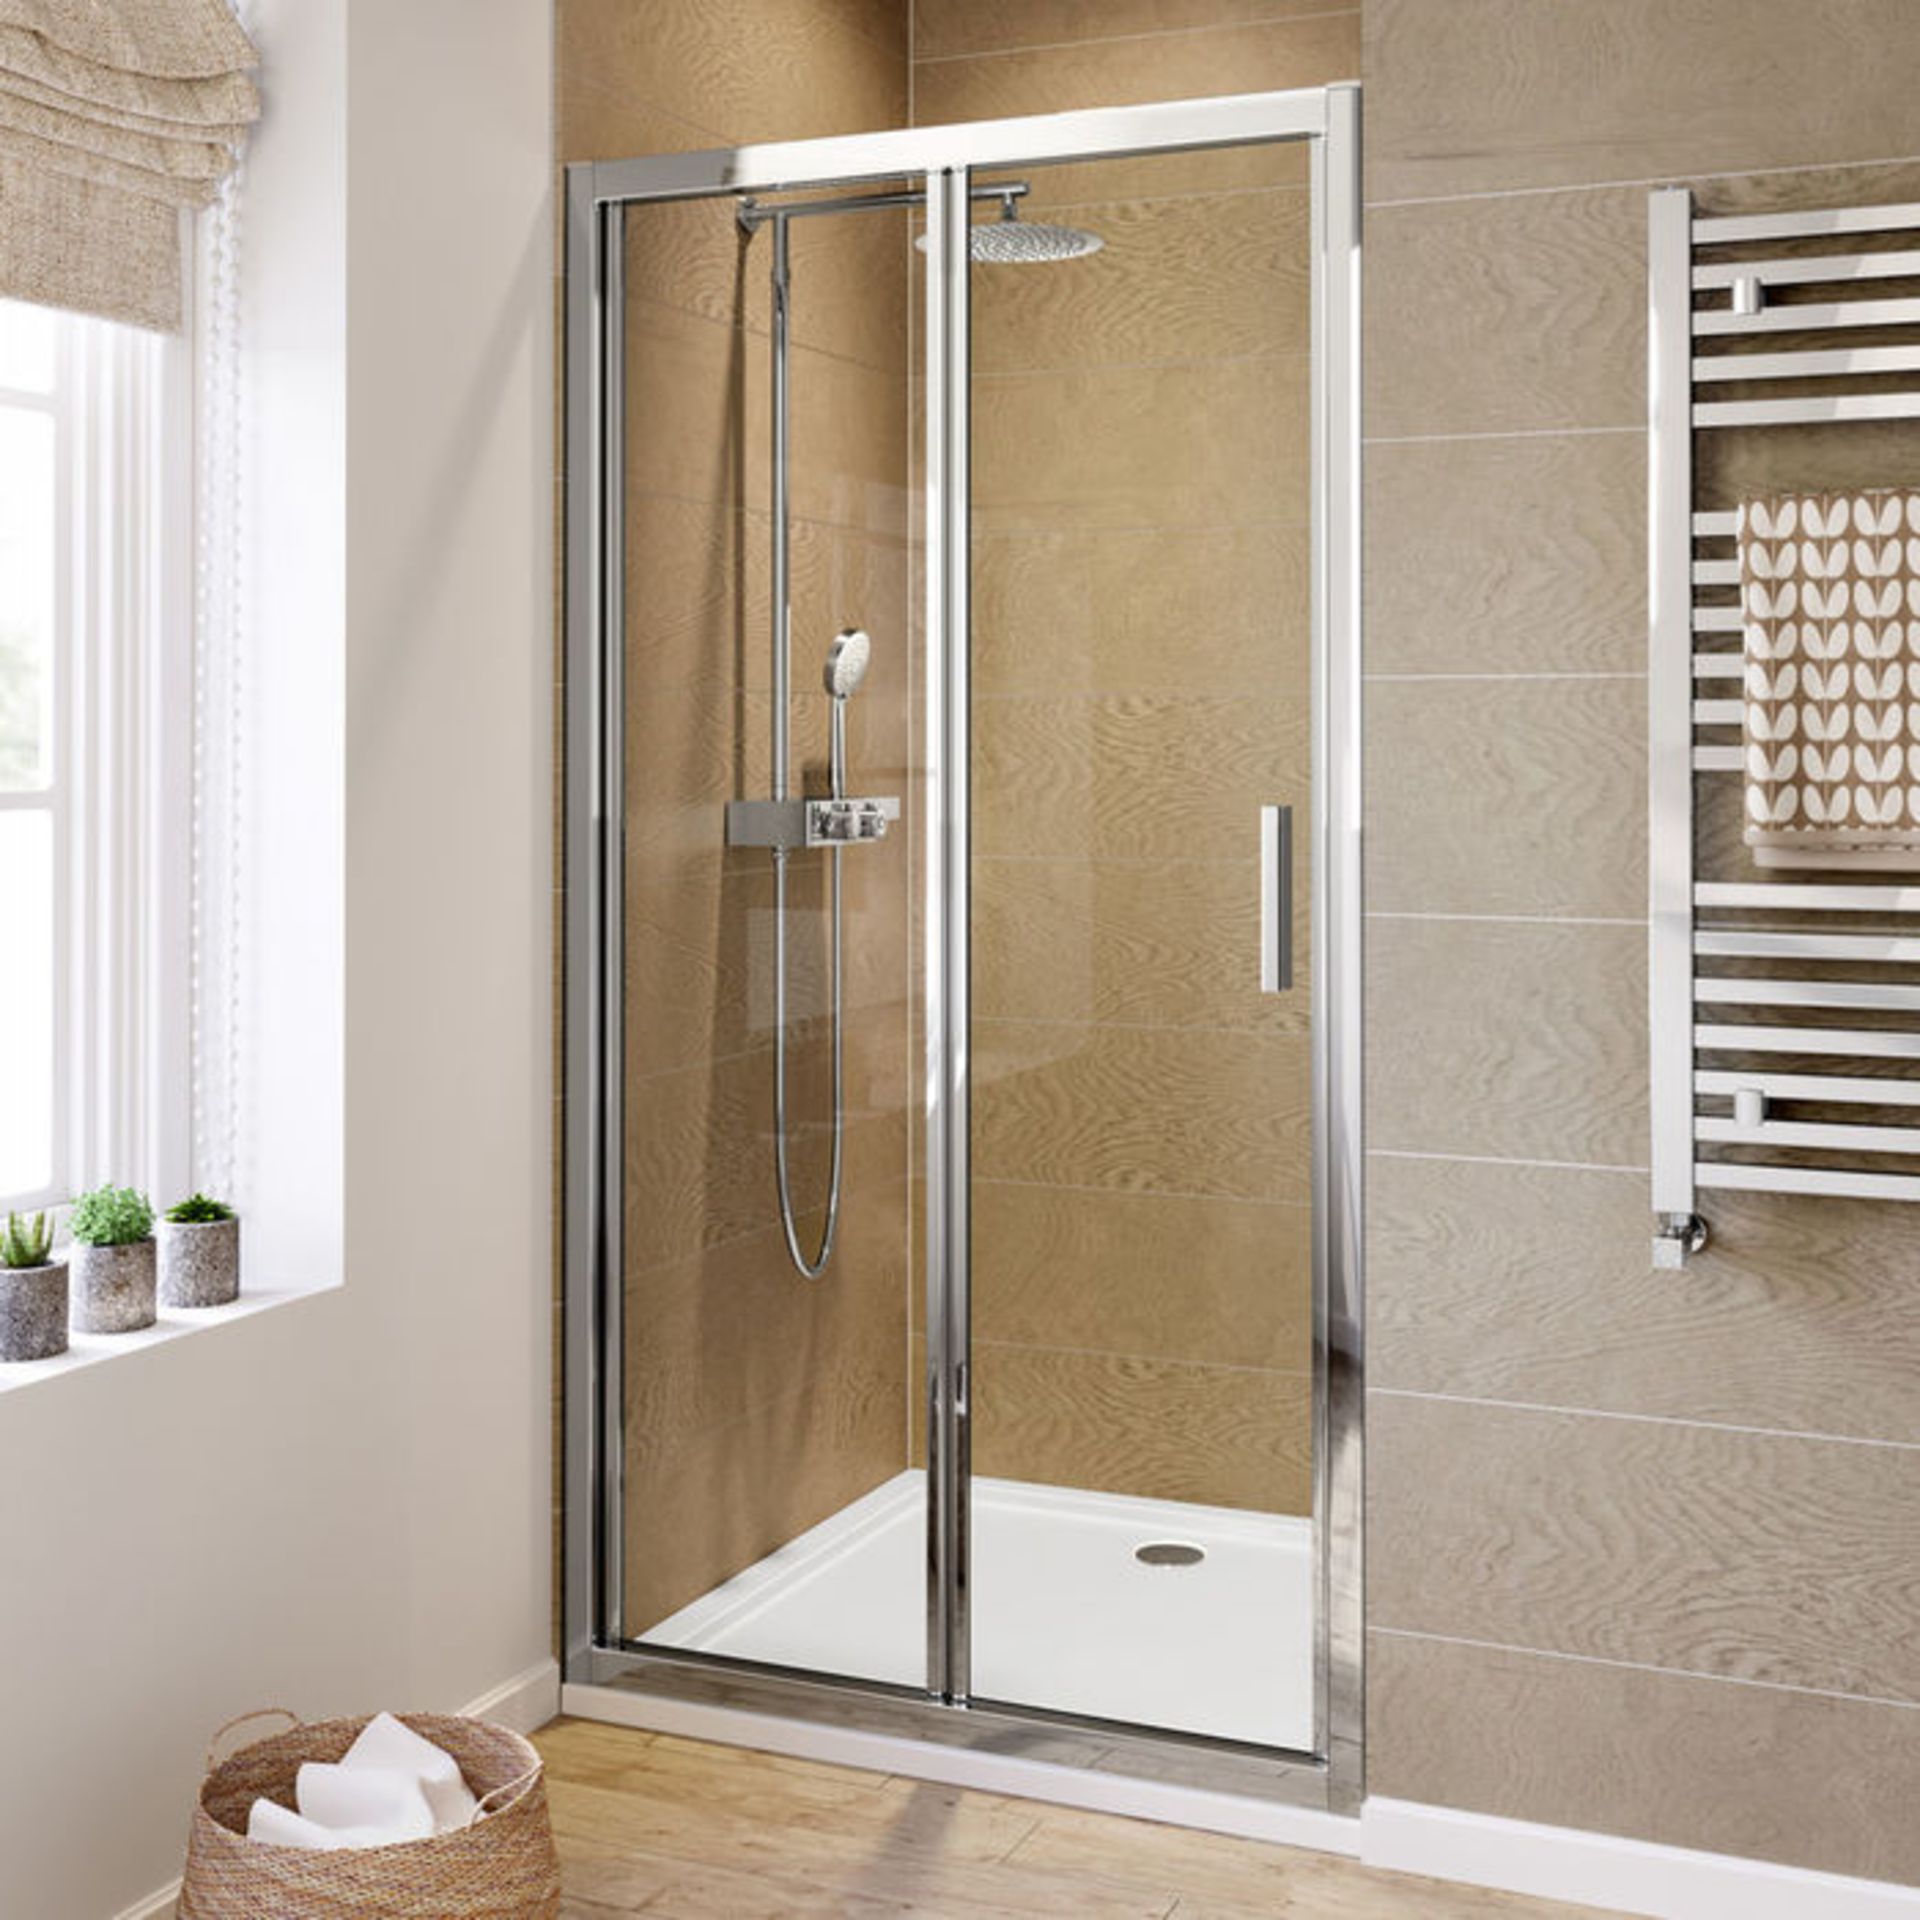 (WG43) NEW 1000mm - 6mm - Elements EasyClean Bifold Shower Door. RRP £299.99. 6mm Safety Glass... - Image 2 of 3